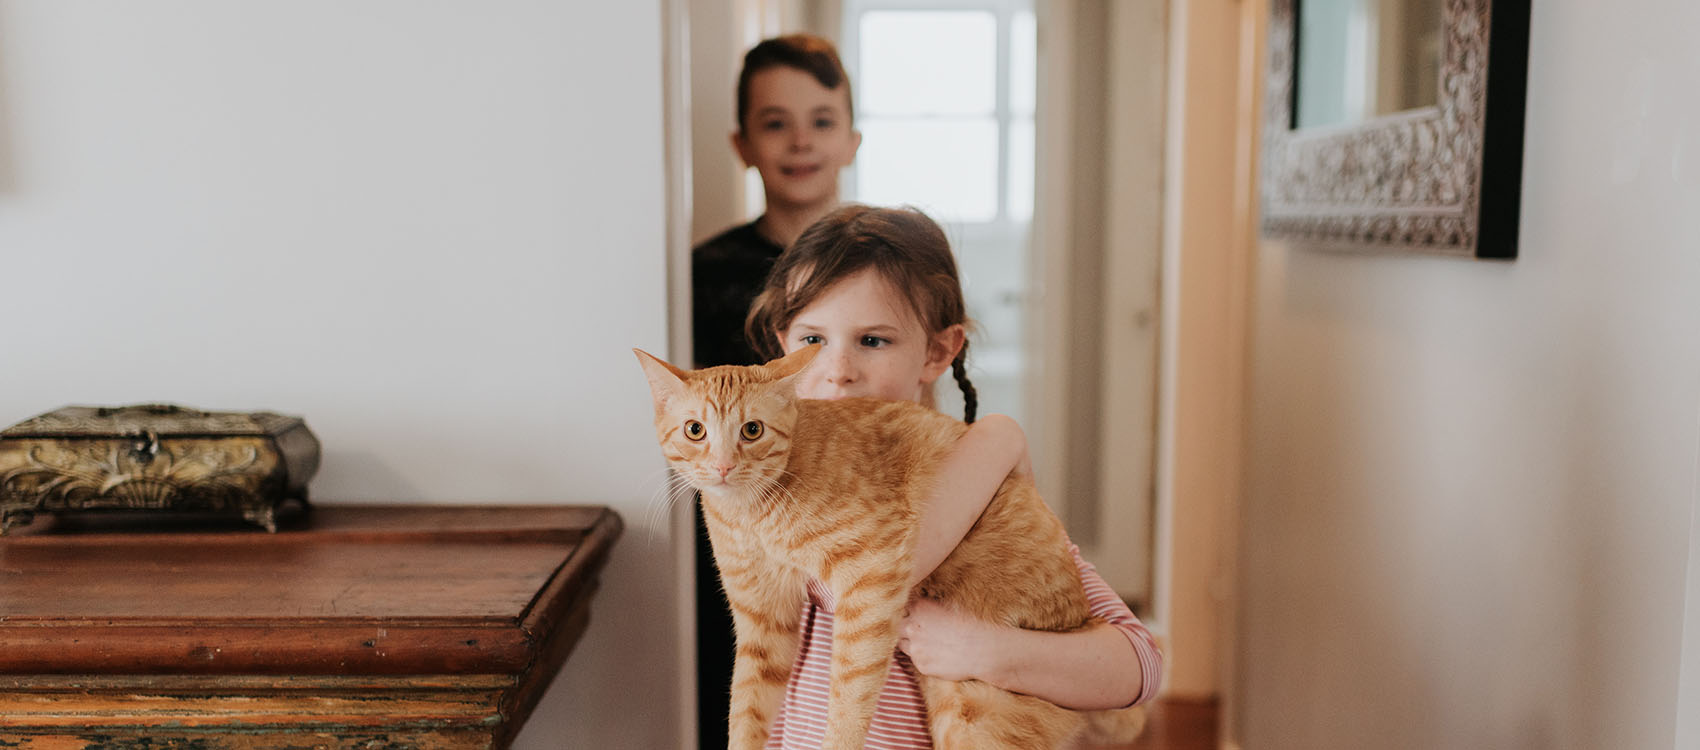 Boy watching sister carrying cat at home